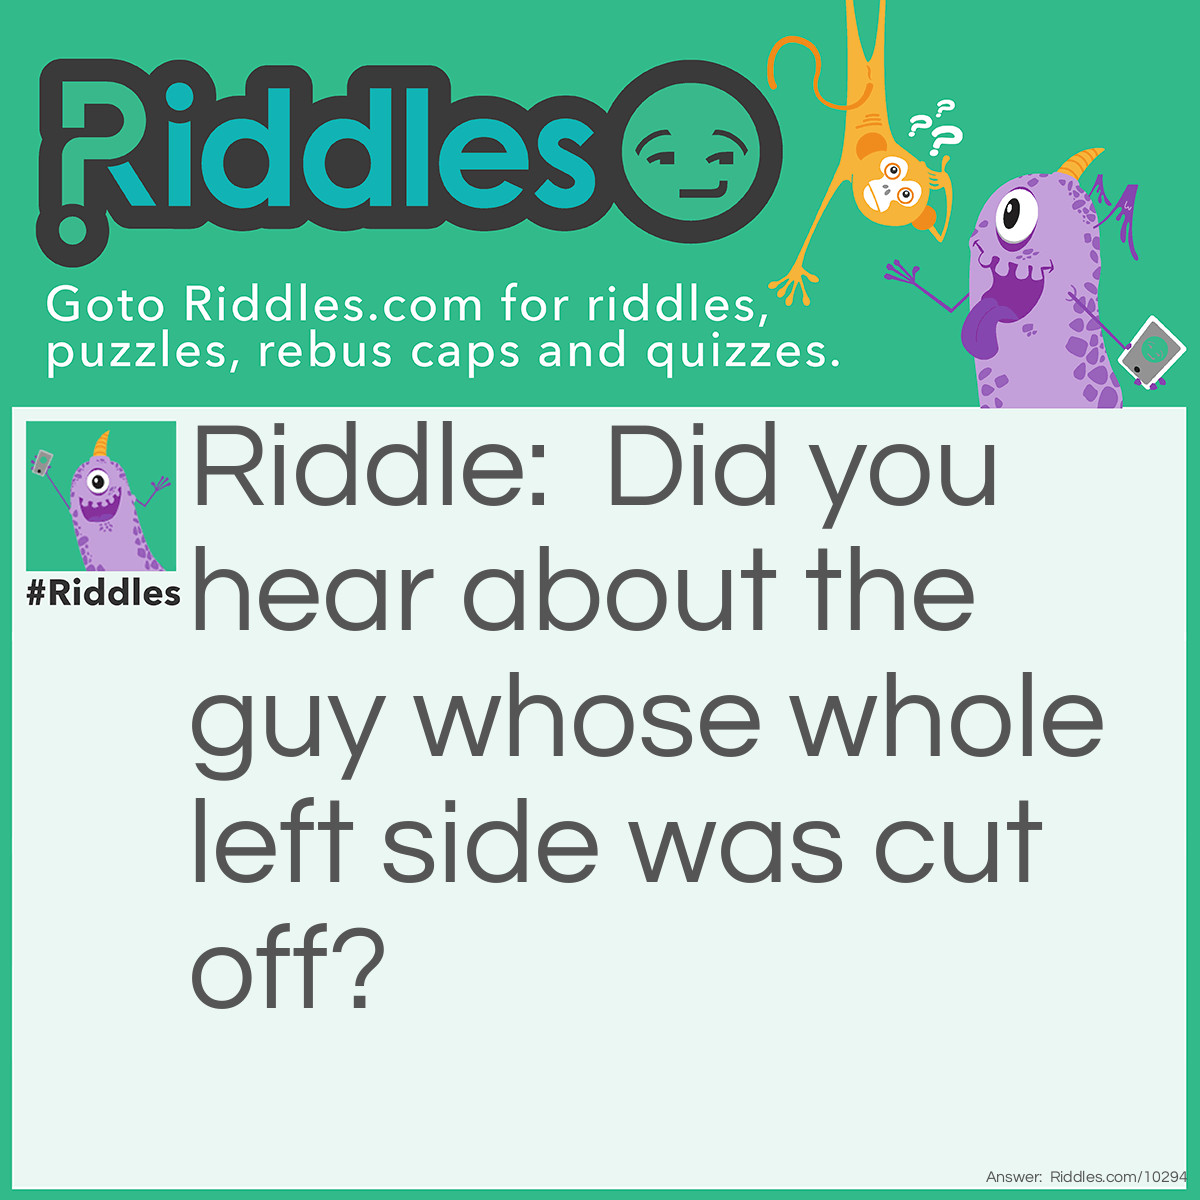 Riddle: Did you hear about the guy whose whole left side was cut off? Answer: He’s all right now.